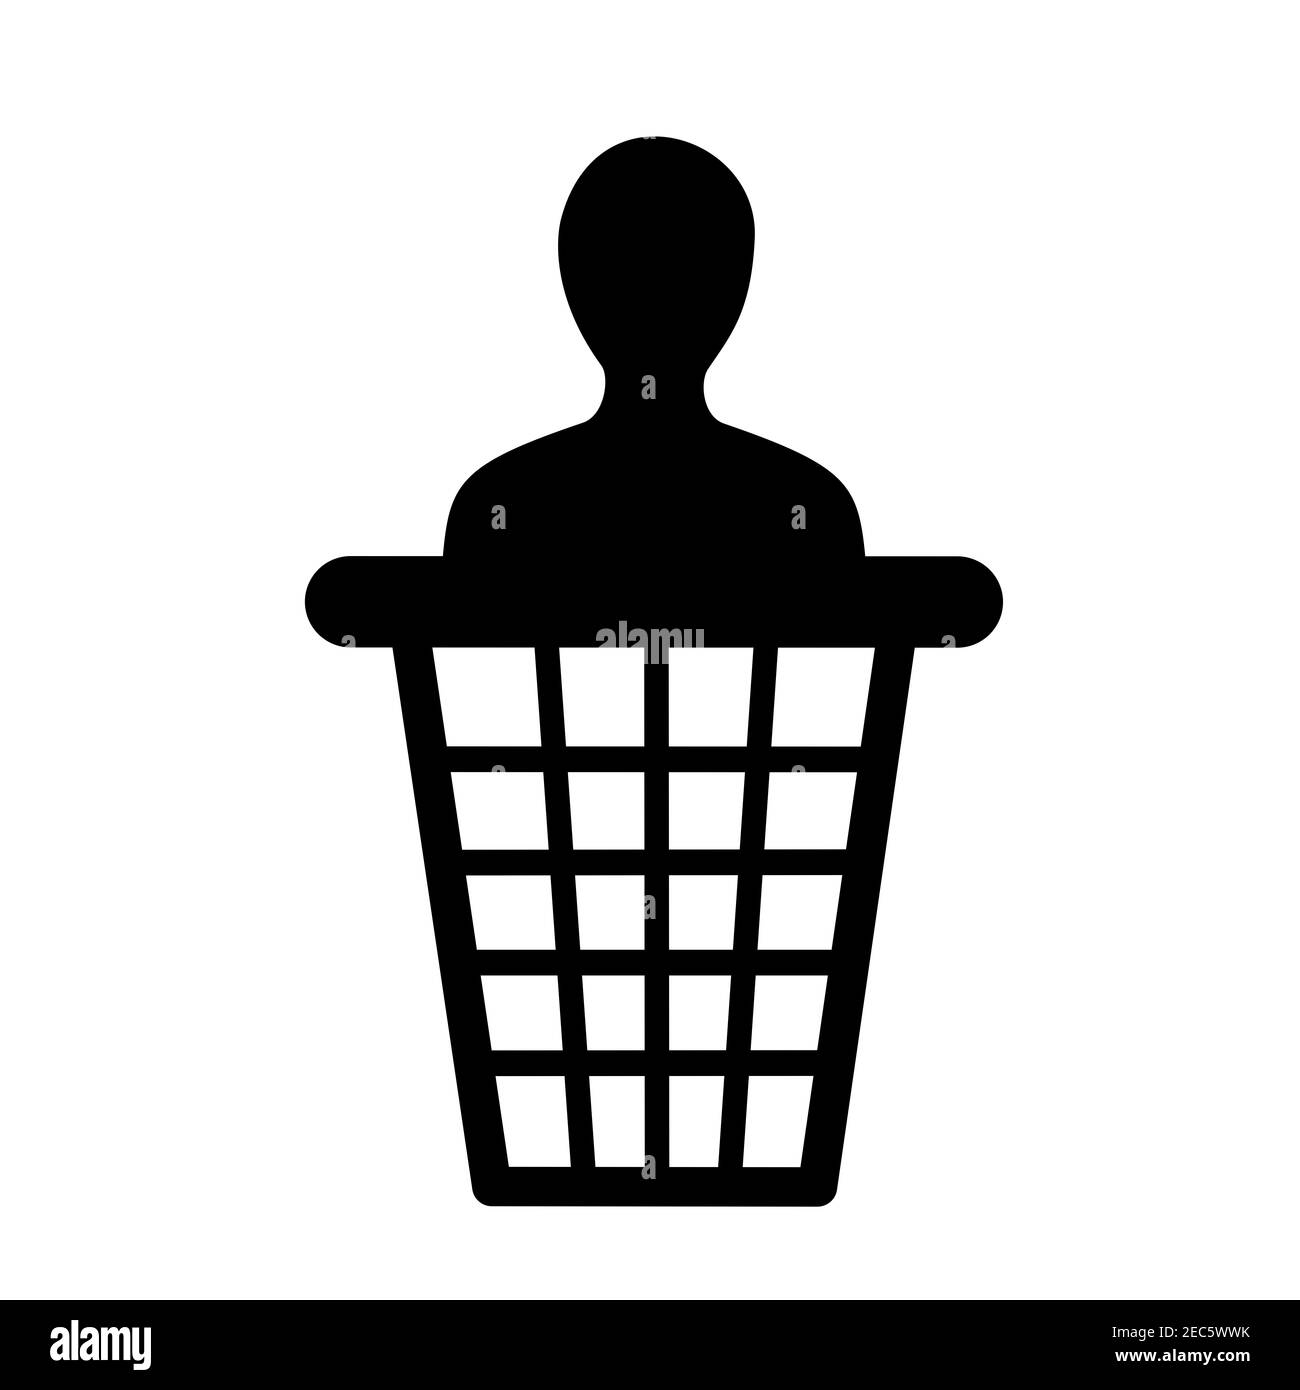 Expendable, redundant and worthless person, human and man is thrown into dustbin, dust bin and garbage can. Metaphor of dismissal. Vector illustration Stock Photo